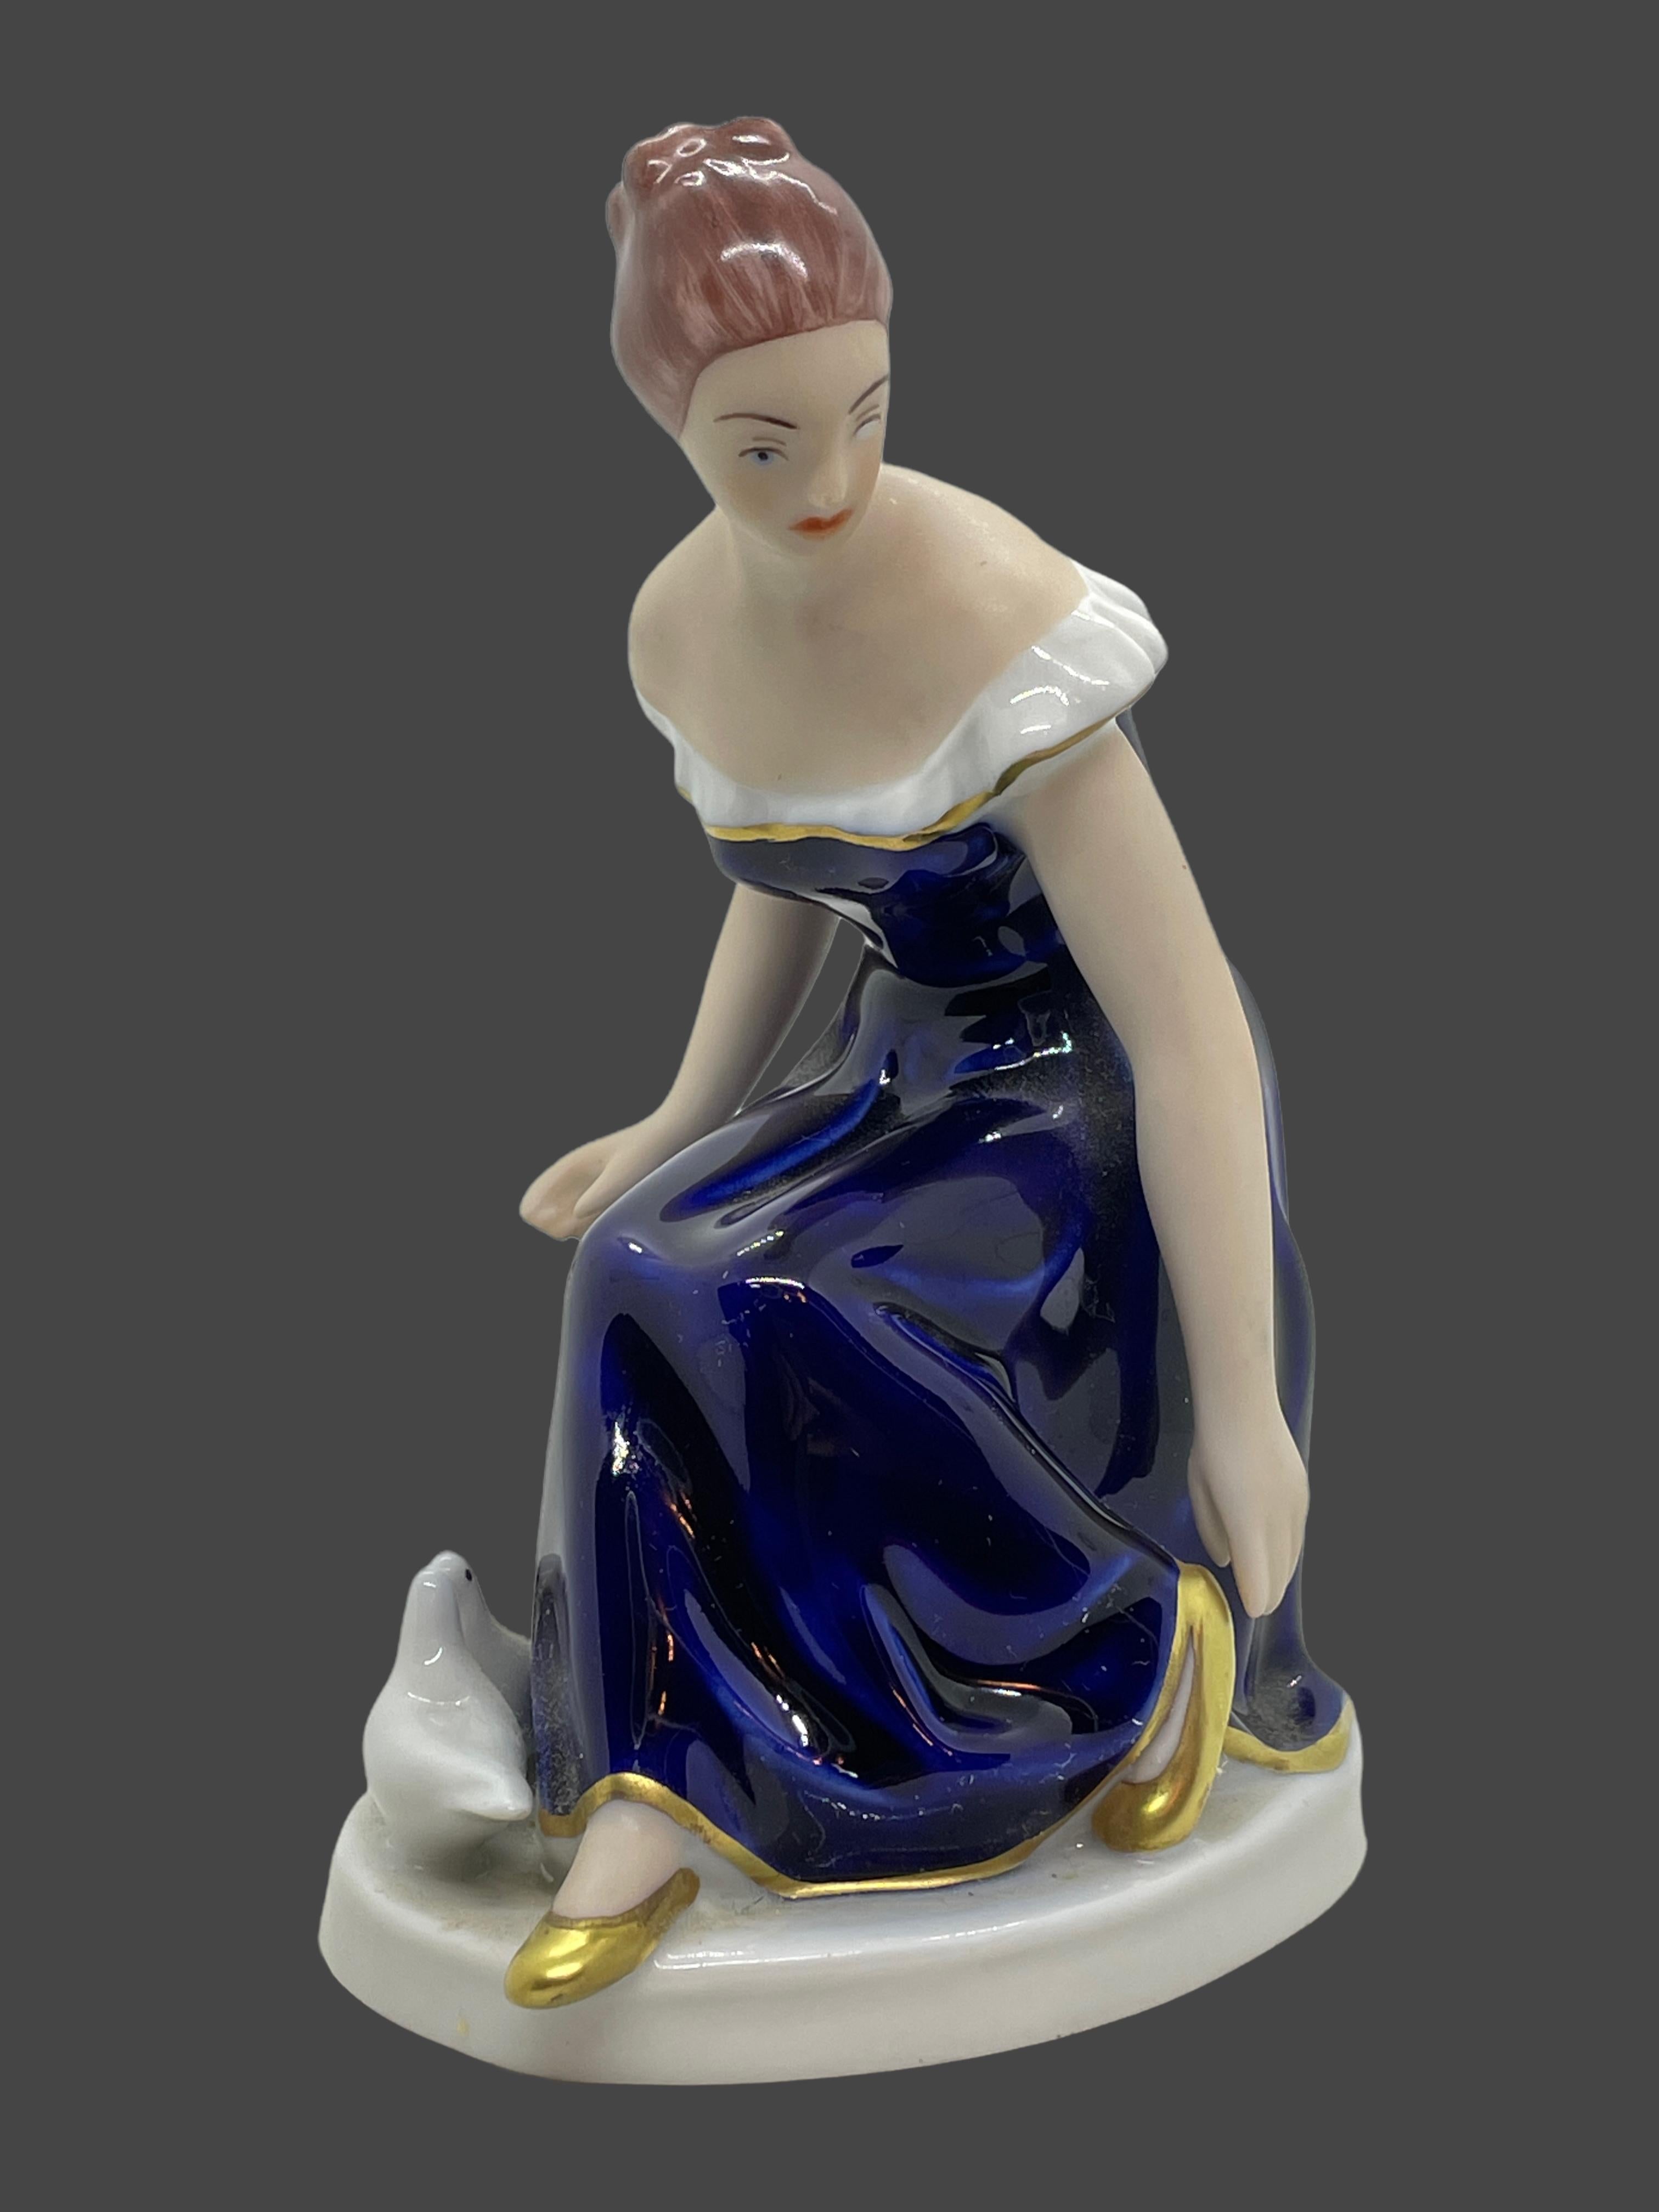 A very beautiful Royal Dux Bohemia porcelain sculpture, mid-20th century, mid-century modern period, Czechoslovakia. A very beautiful and detailed porcelain figurine. With maker's mark on bottom, Royal Dux Bohemia, as shown in images.